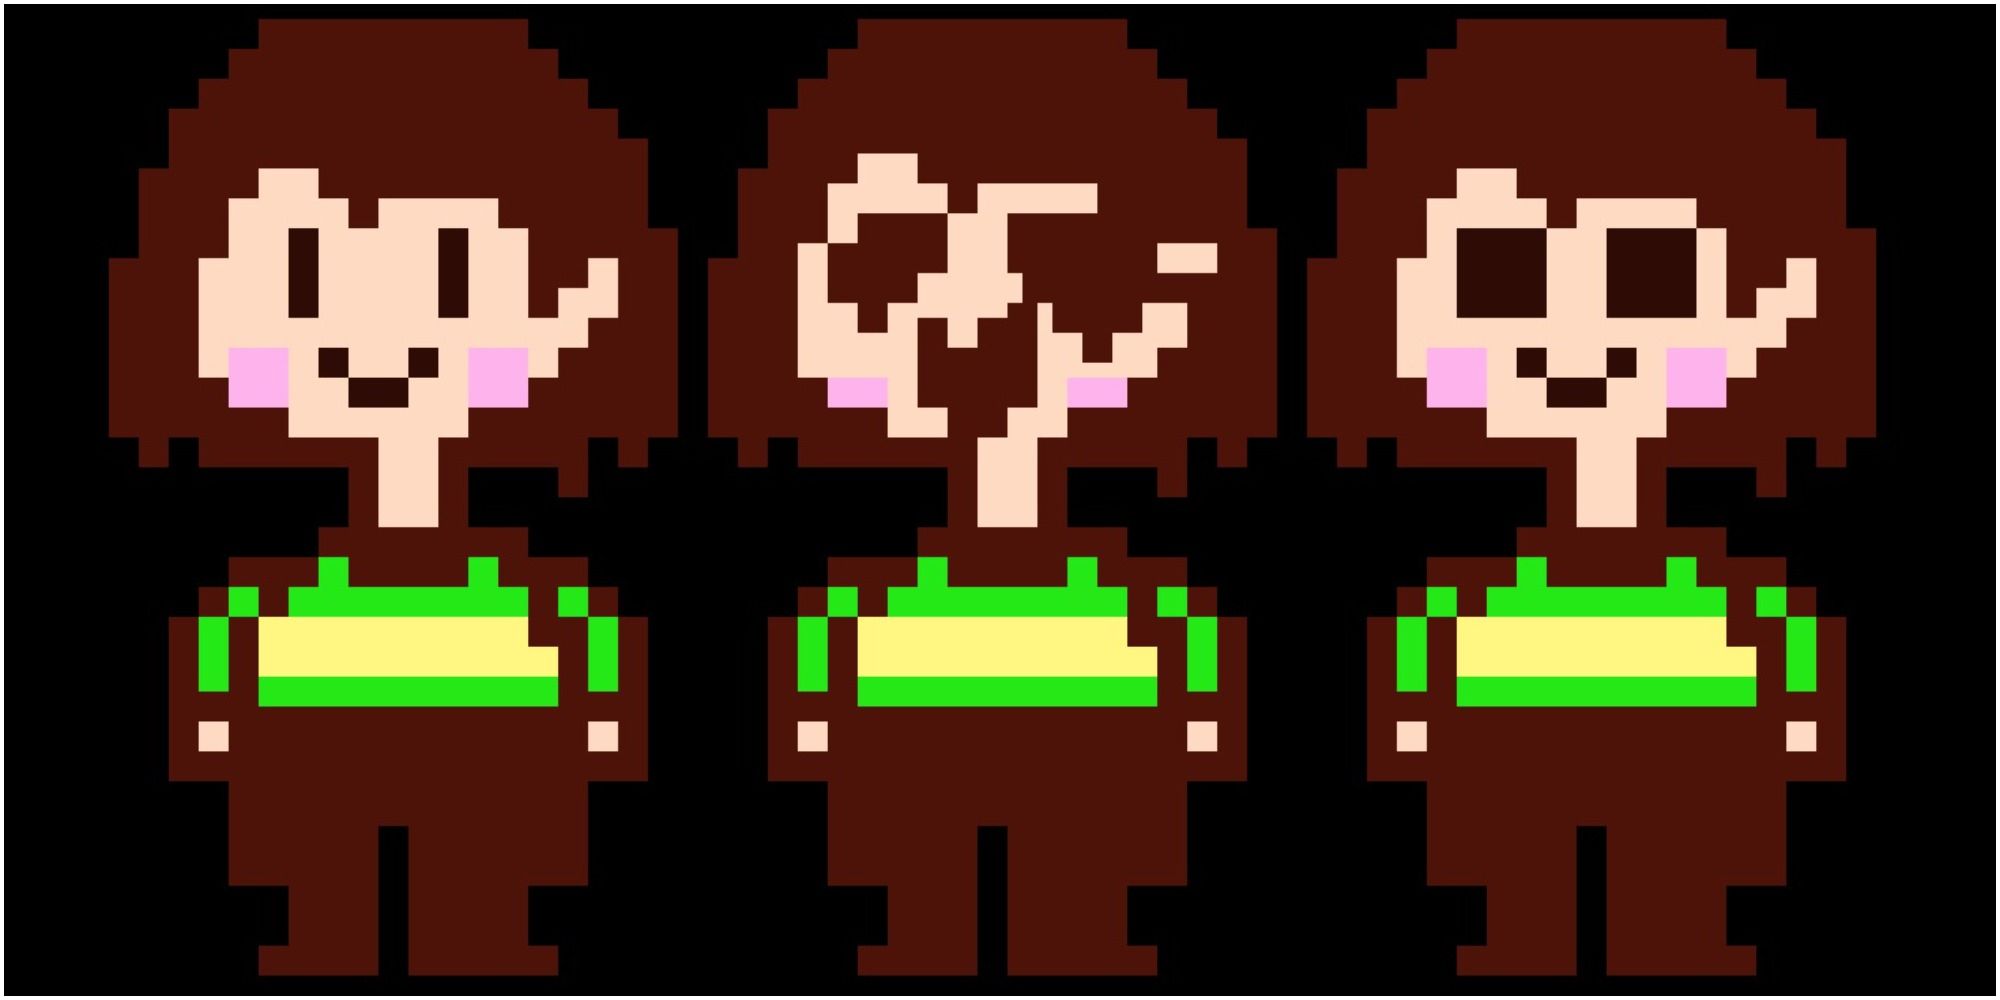 Chara from Undertale's multiple sprites